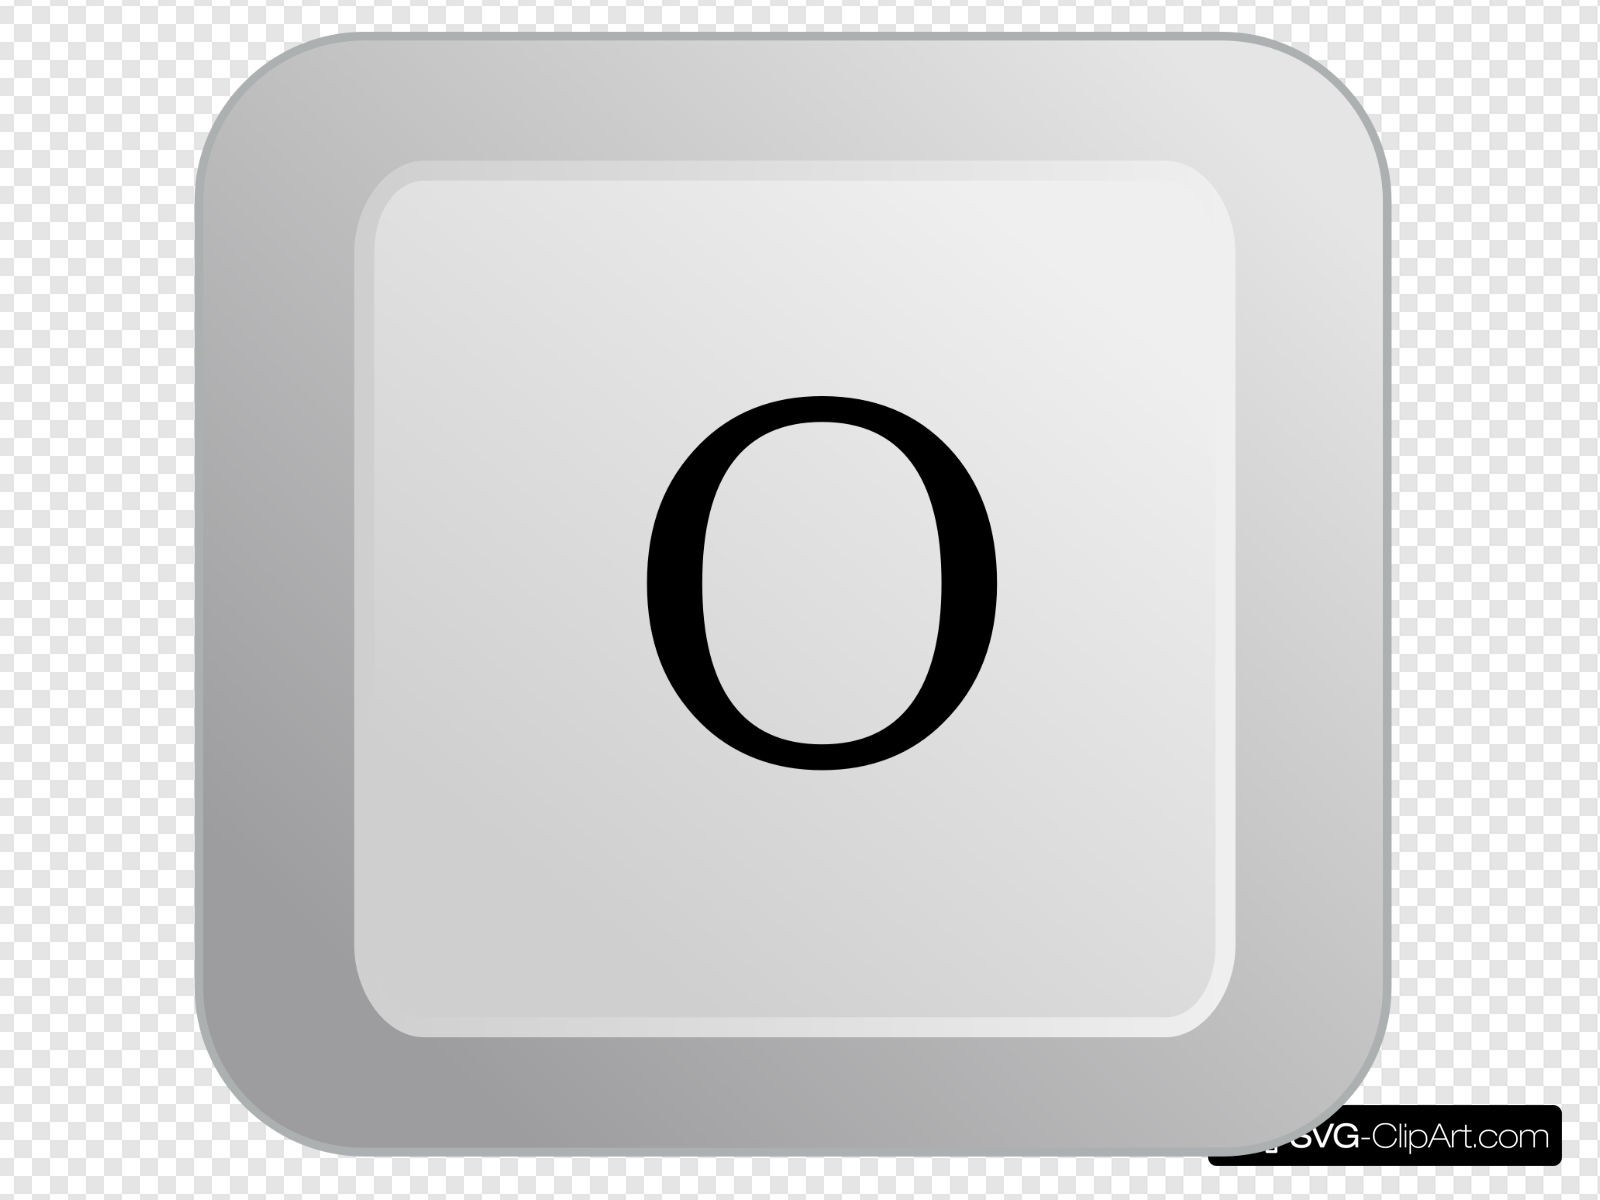 O Keyboard Button Clip art, Icon and SVG.